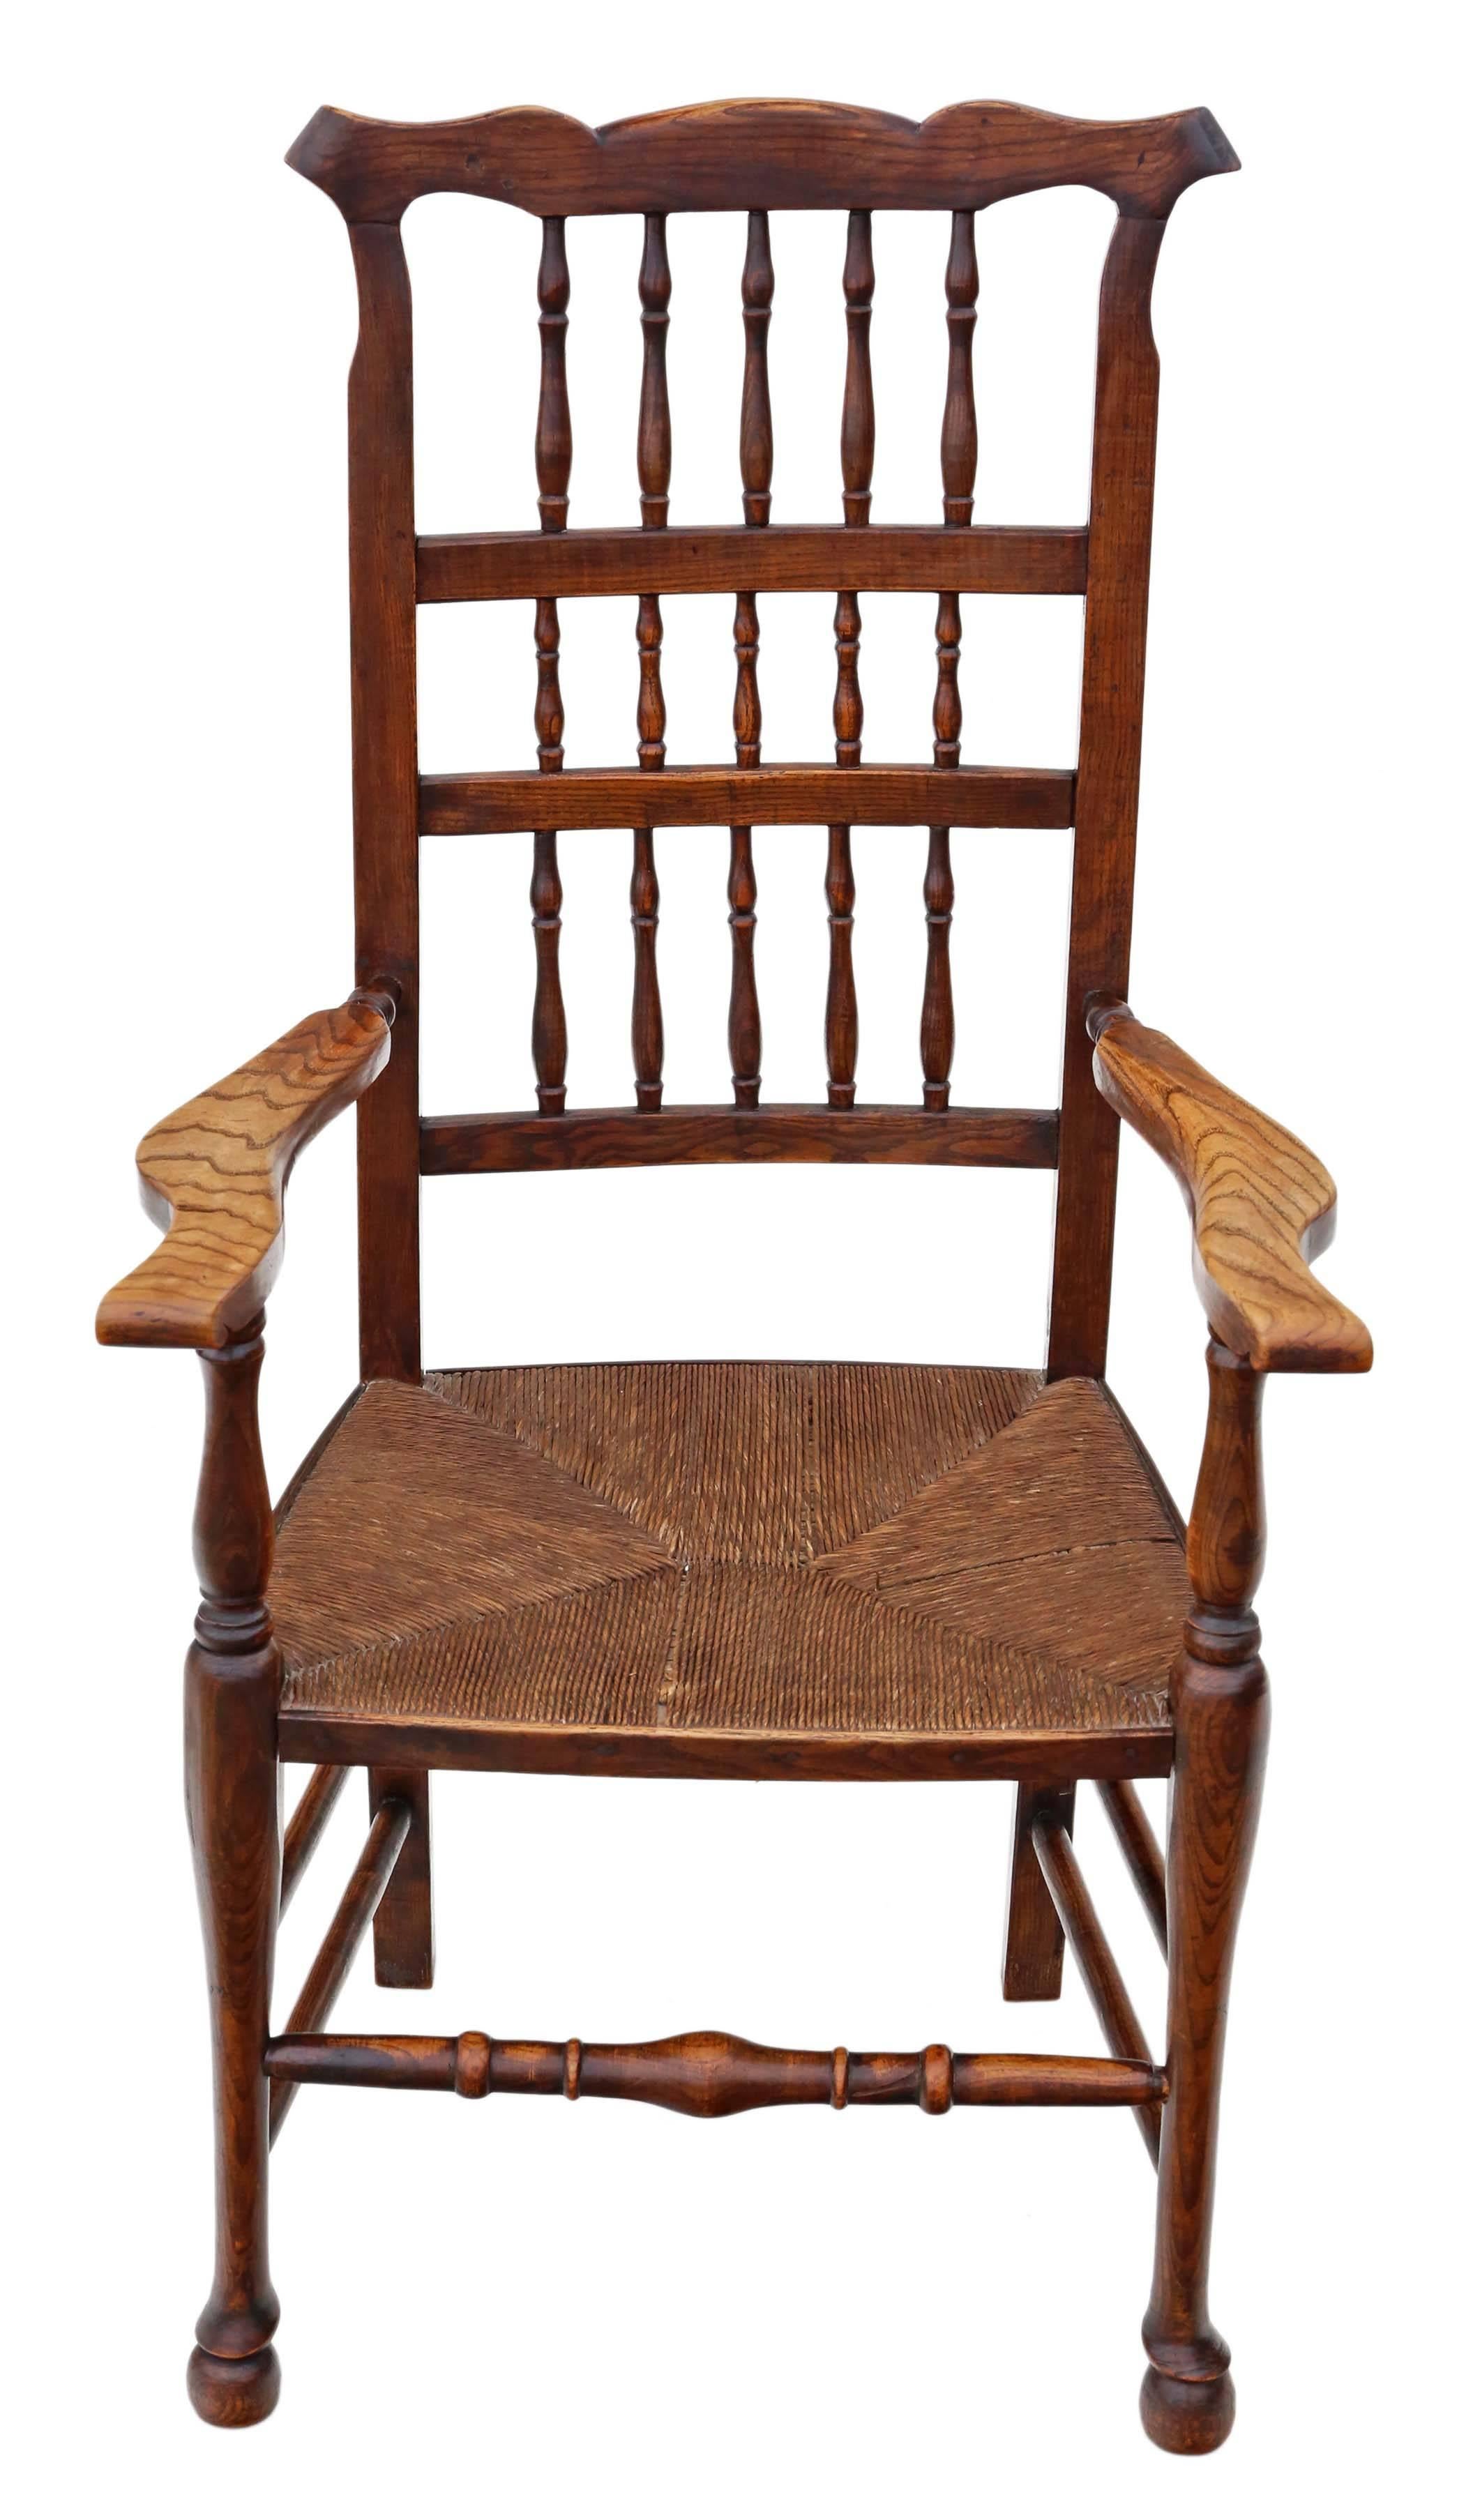 Antique 19th century ash and elm armchair.
A great chair with a lot of age and charm. A rare find.

Lovely proportions and styling. Great color.

Nice wear and patina to the arms.

Solid, with no loose joints. No woodworm.

Overall maximum